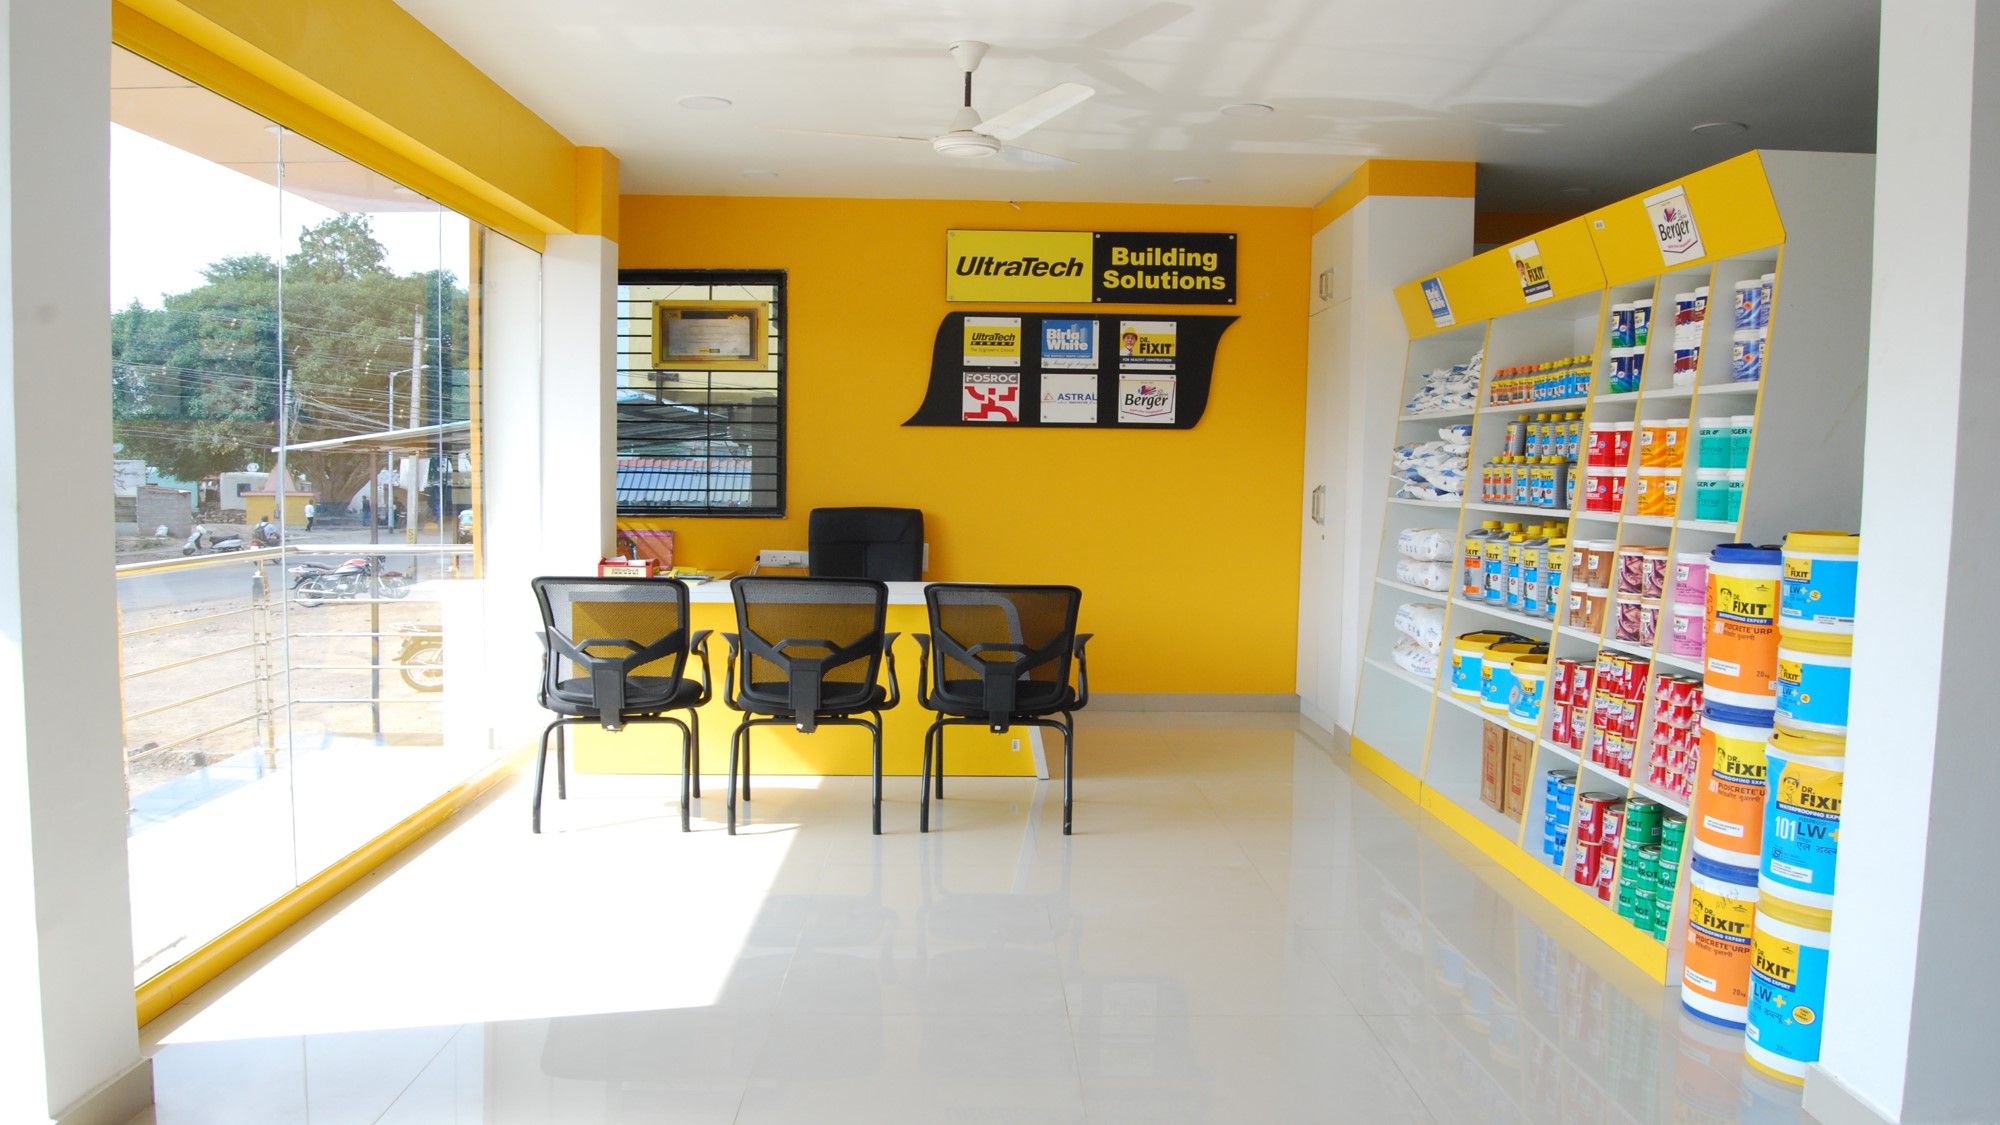 UltraTech Building Solutions